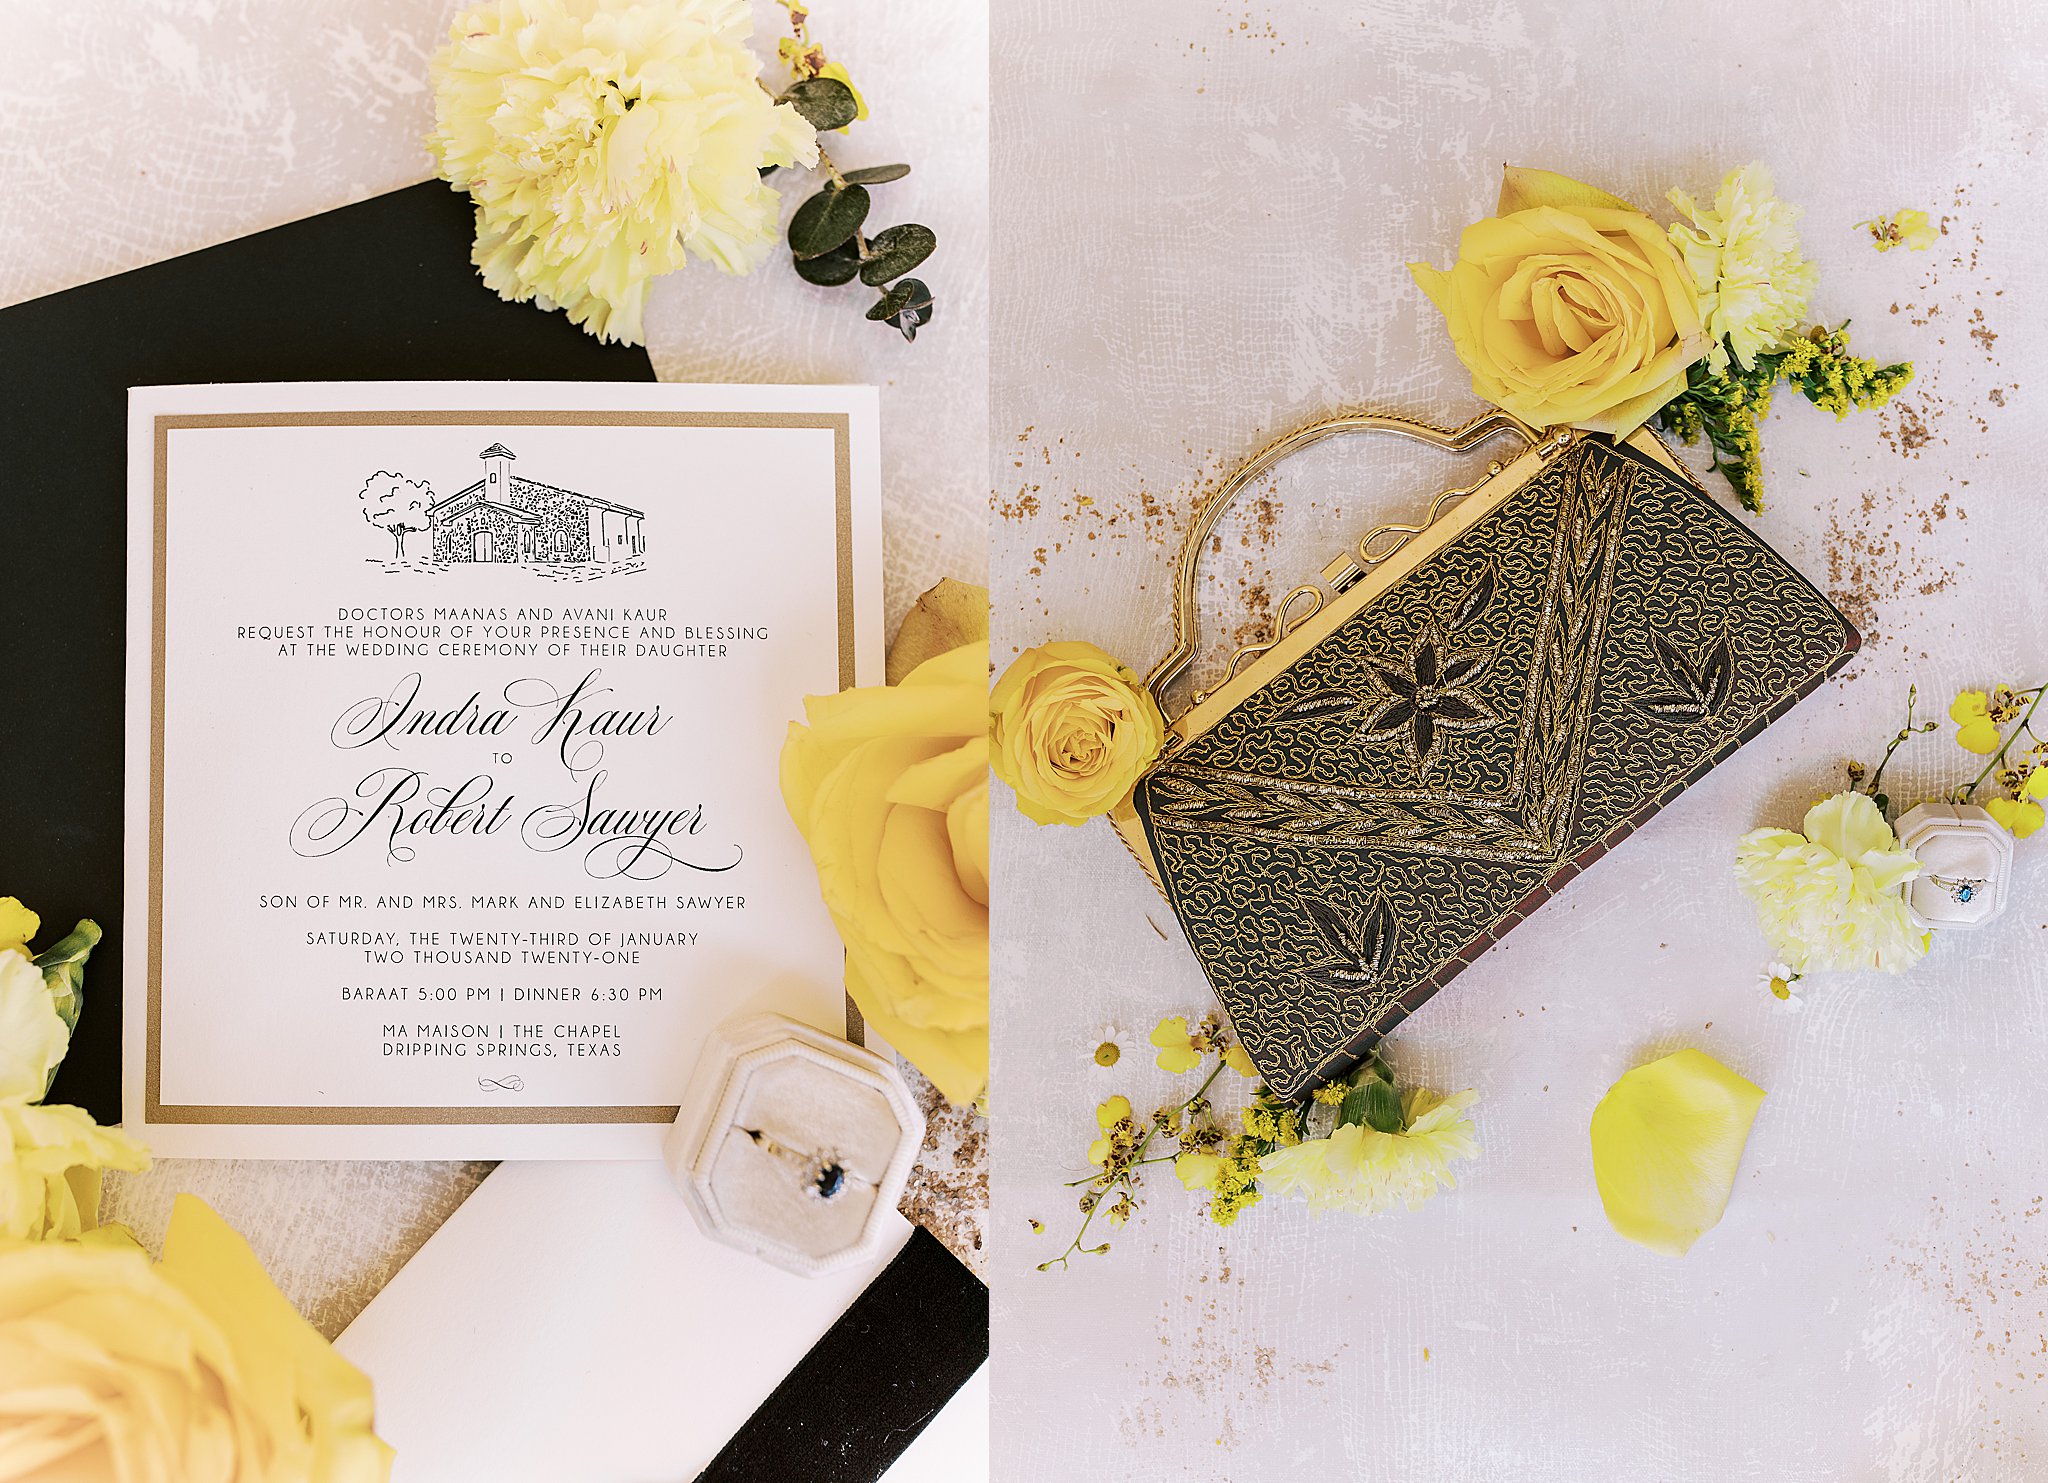 Gold beaded clutch and yellow rose detail and elegant wedding invitation